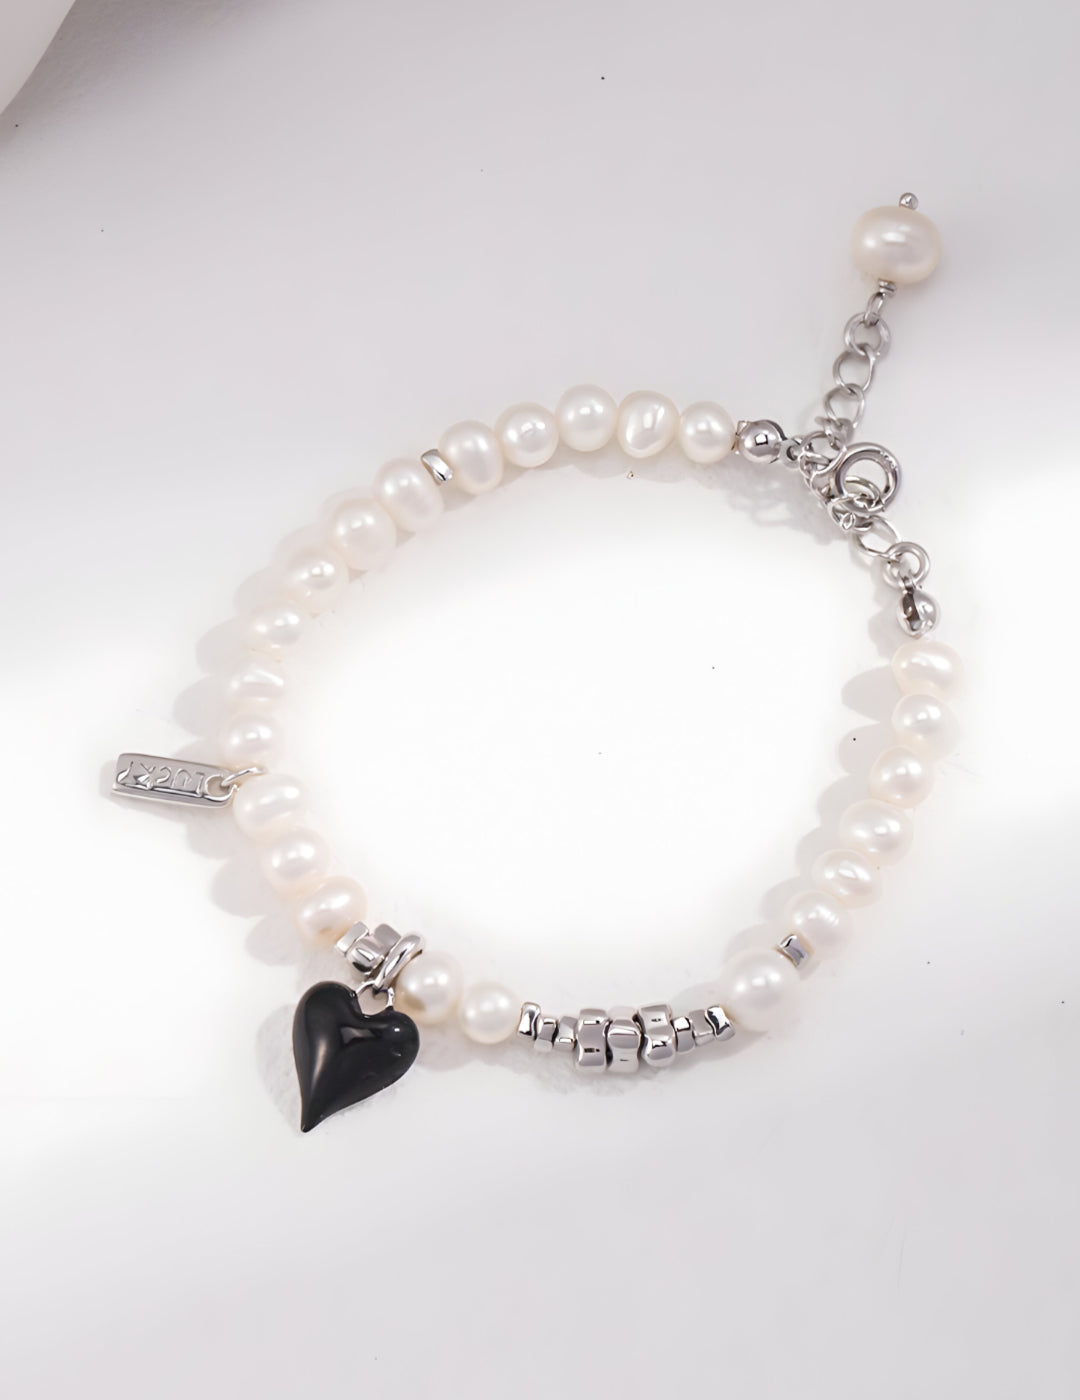 Black Heart Pearl Bracelet - S925 sterling pure silver luminous beauty of high quality natural pearls radiate elegance and grace, enchanting all who behold them